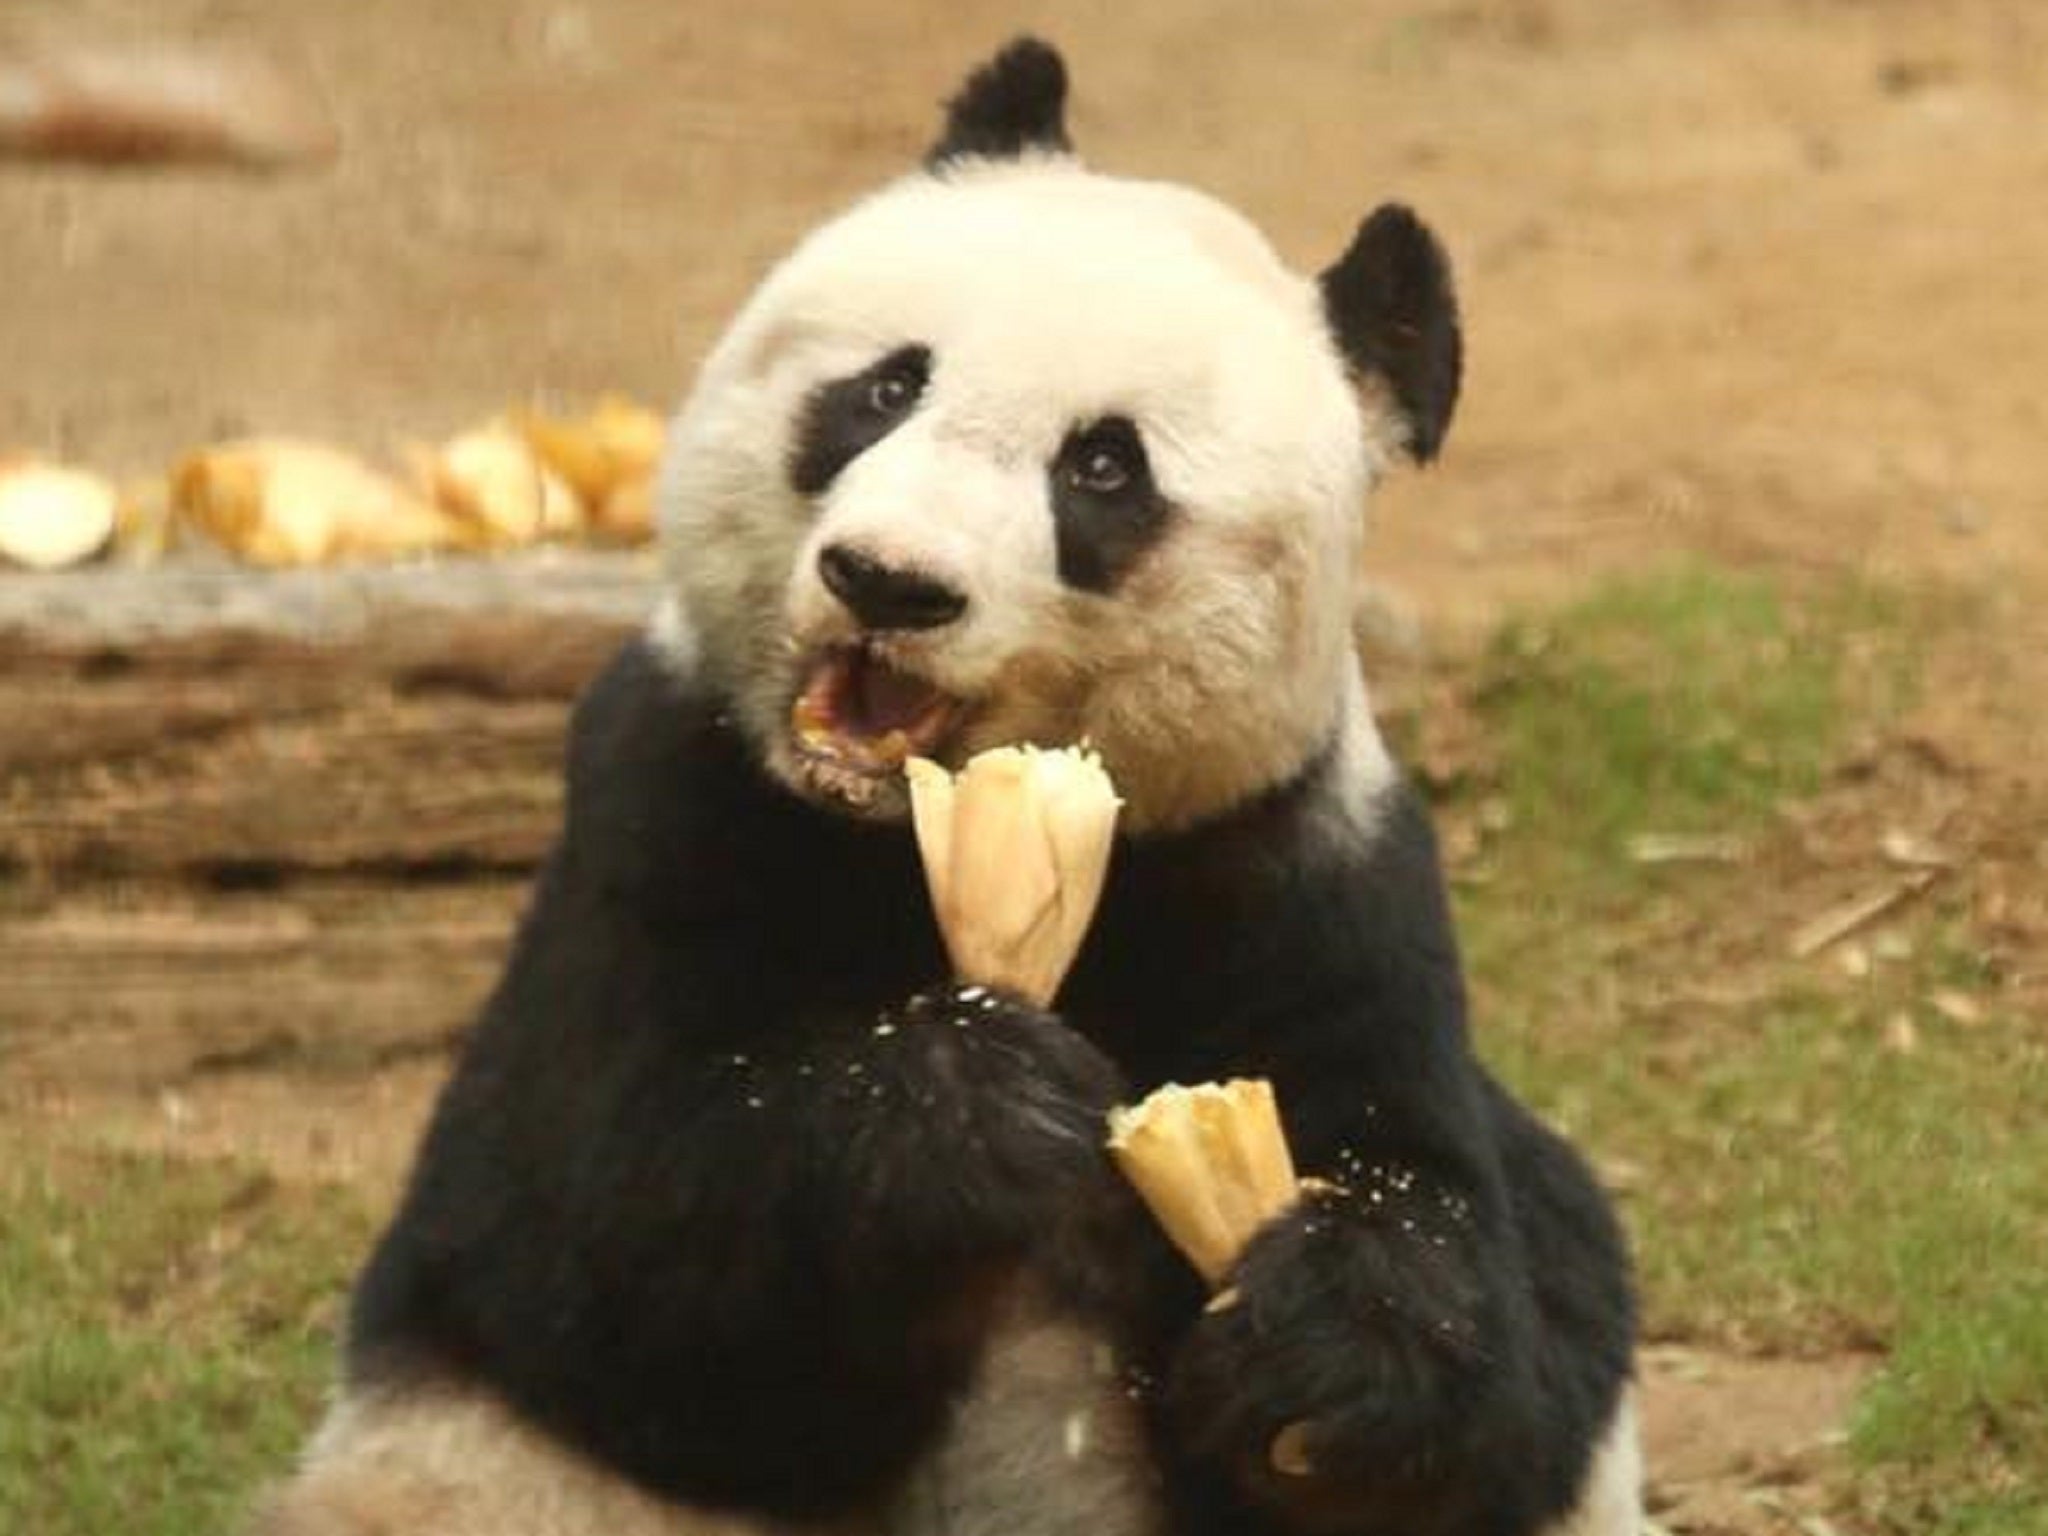 Jia Jia defied the average life expectancy for wild giant pandas, which is somewhere below 20 years' old